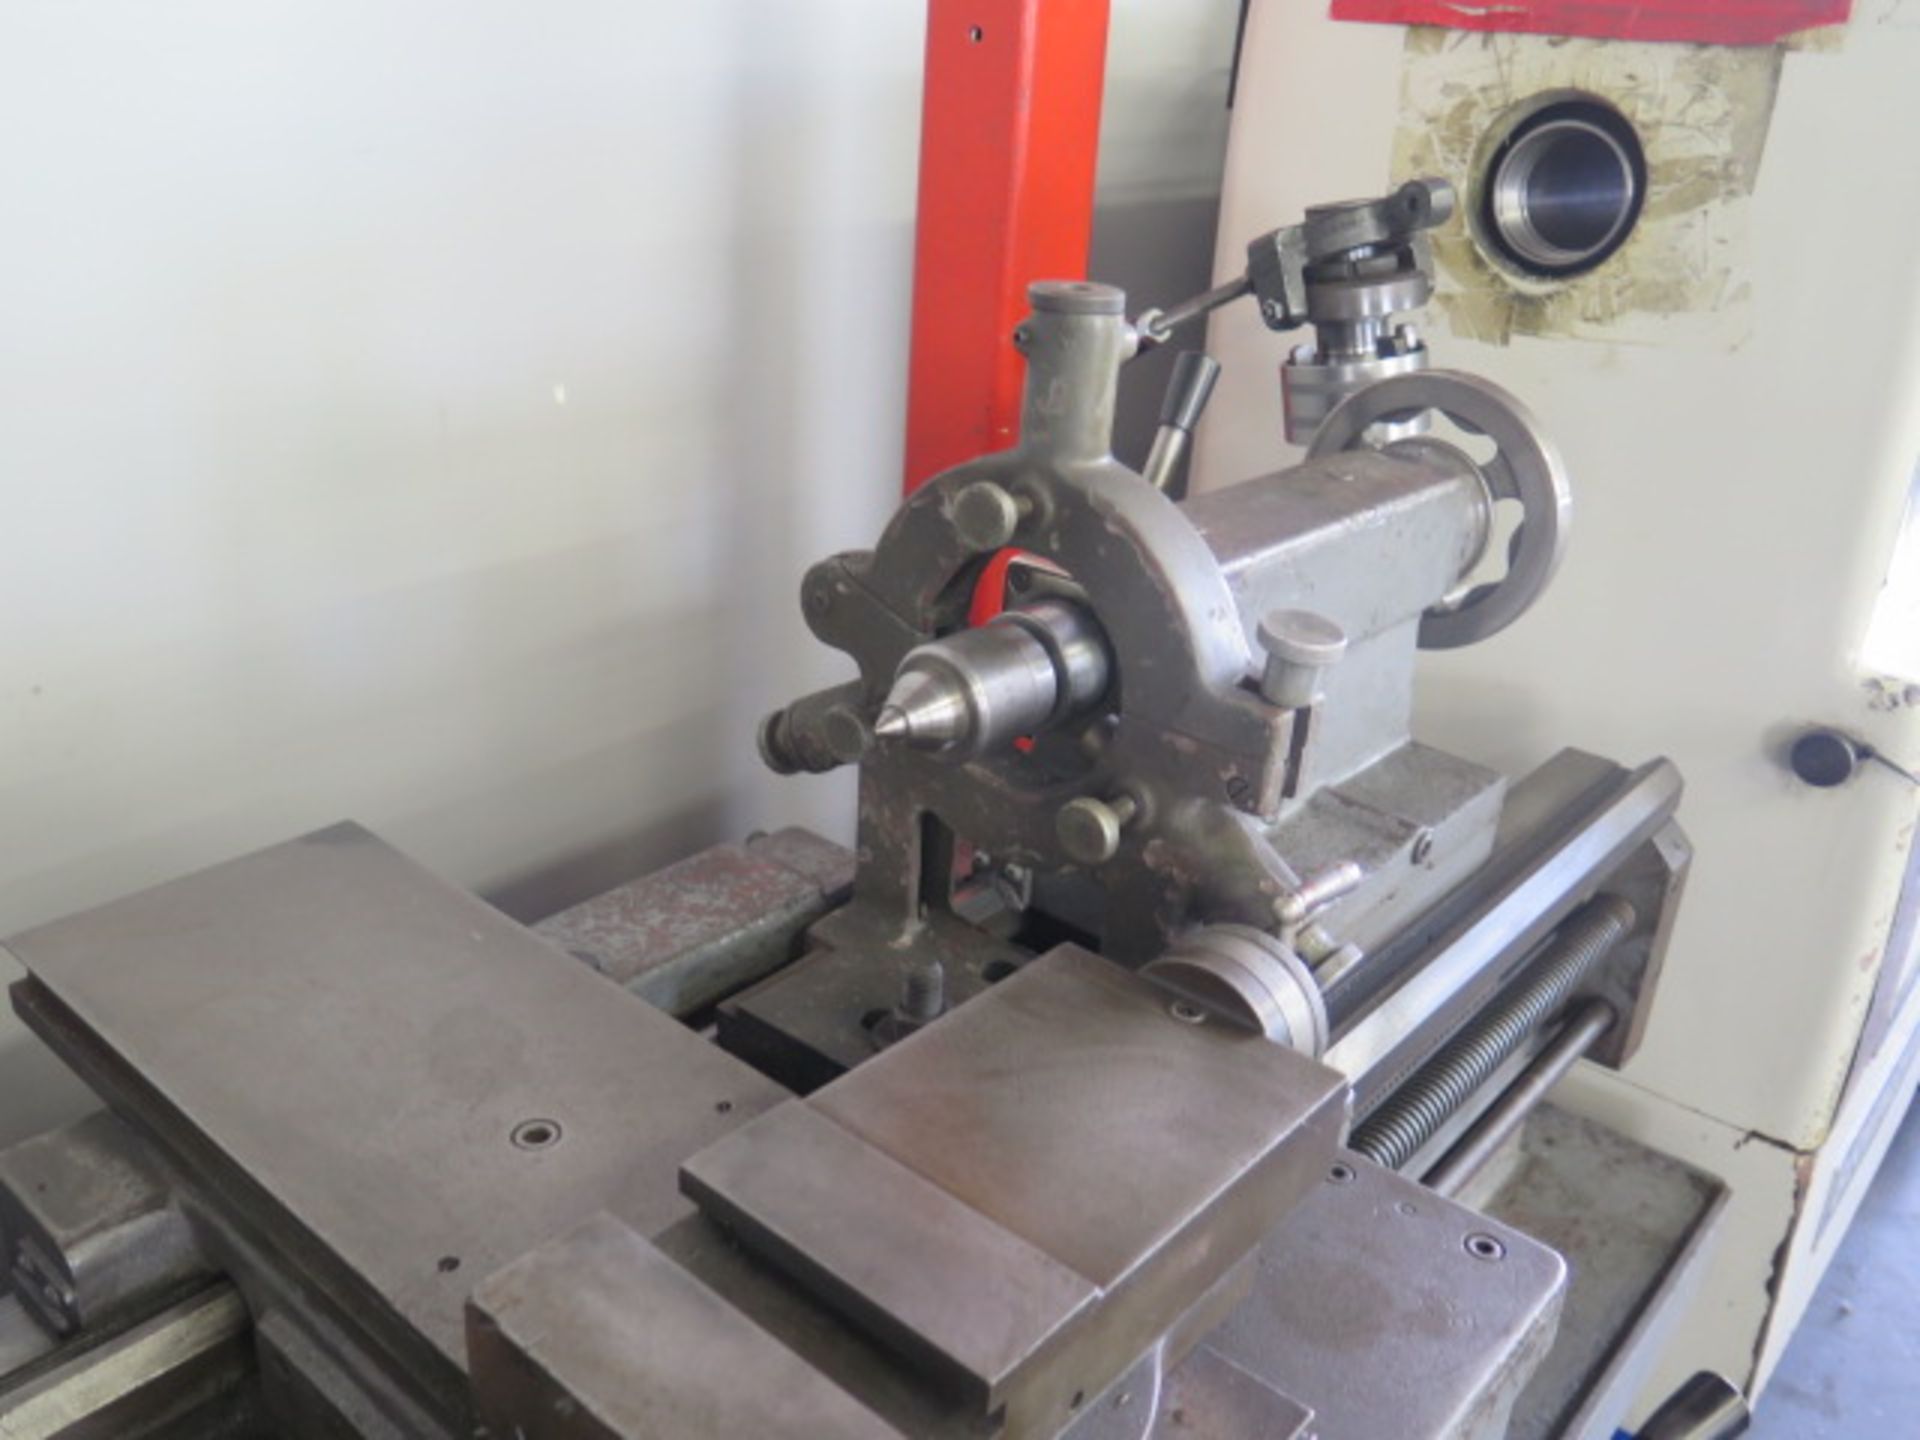 Cadillac 14" x 28" Geared Lathe w/ 83-1800 RPM, Inch Threading, Tailstock, Steady Rest, SOLD AS IS - Image 9 of 10